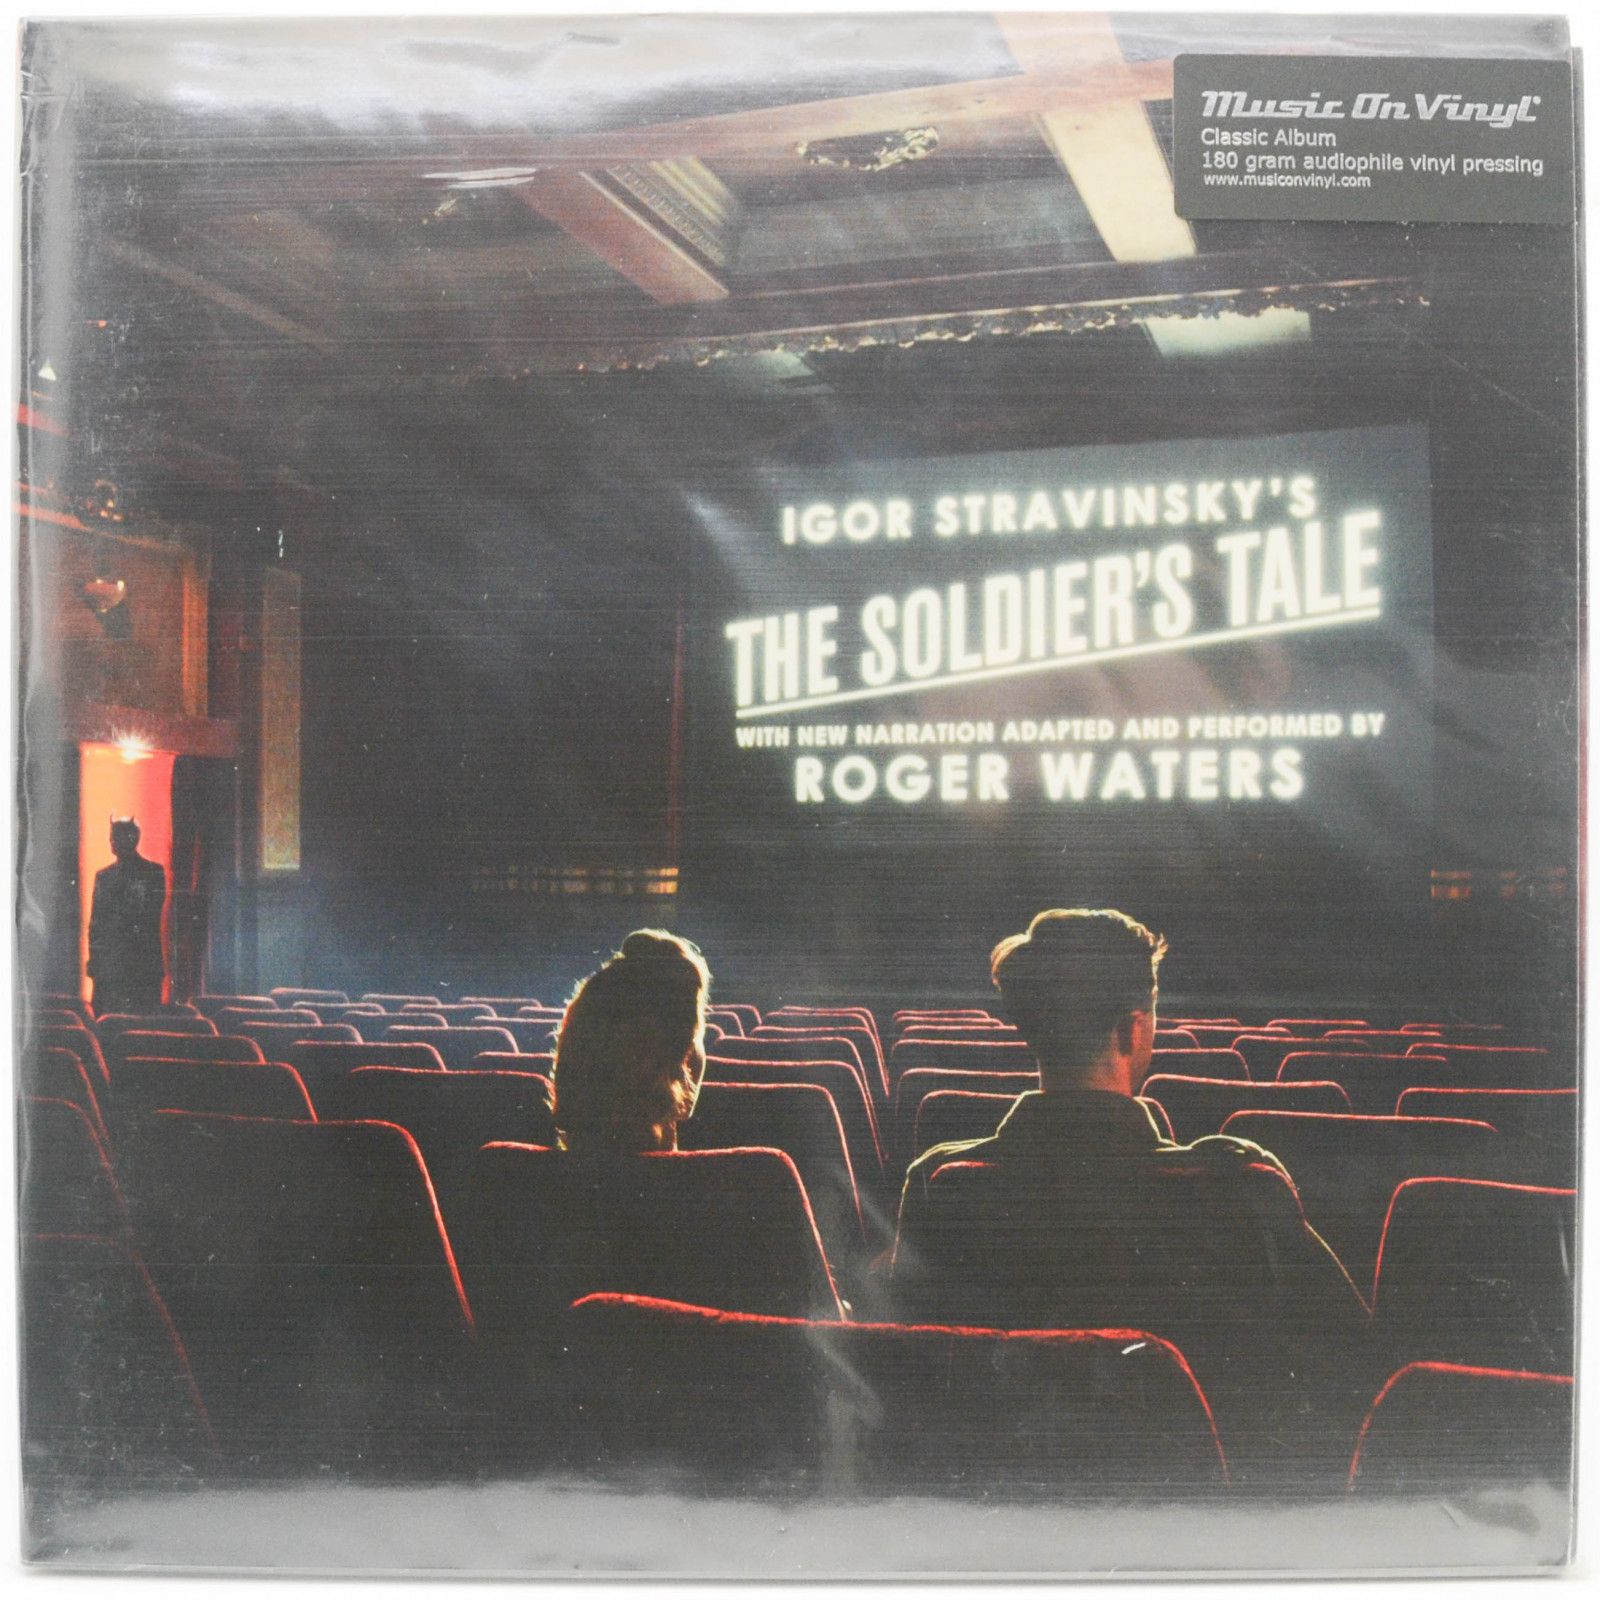 Igor Stravinsky, Roger Waters, BCMF — Igor Stravinsky’s The Soldier’s Tale With New Narration Adapted And Performed By Roger Waters (2LP), 2018